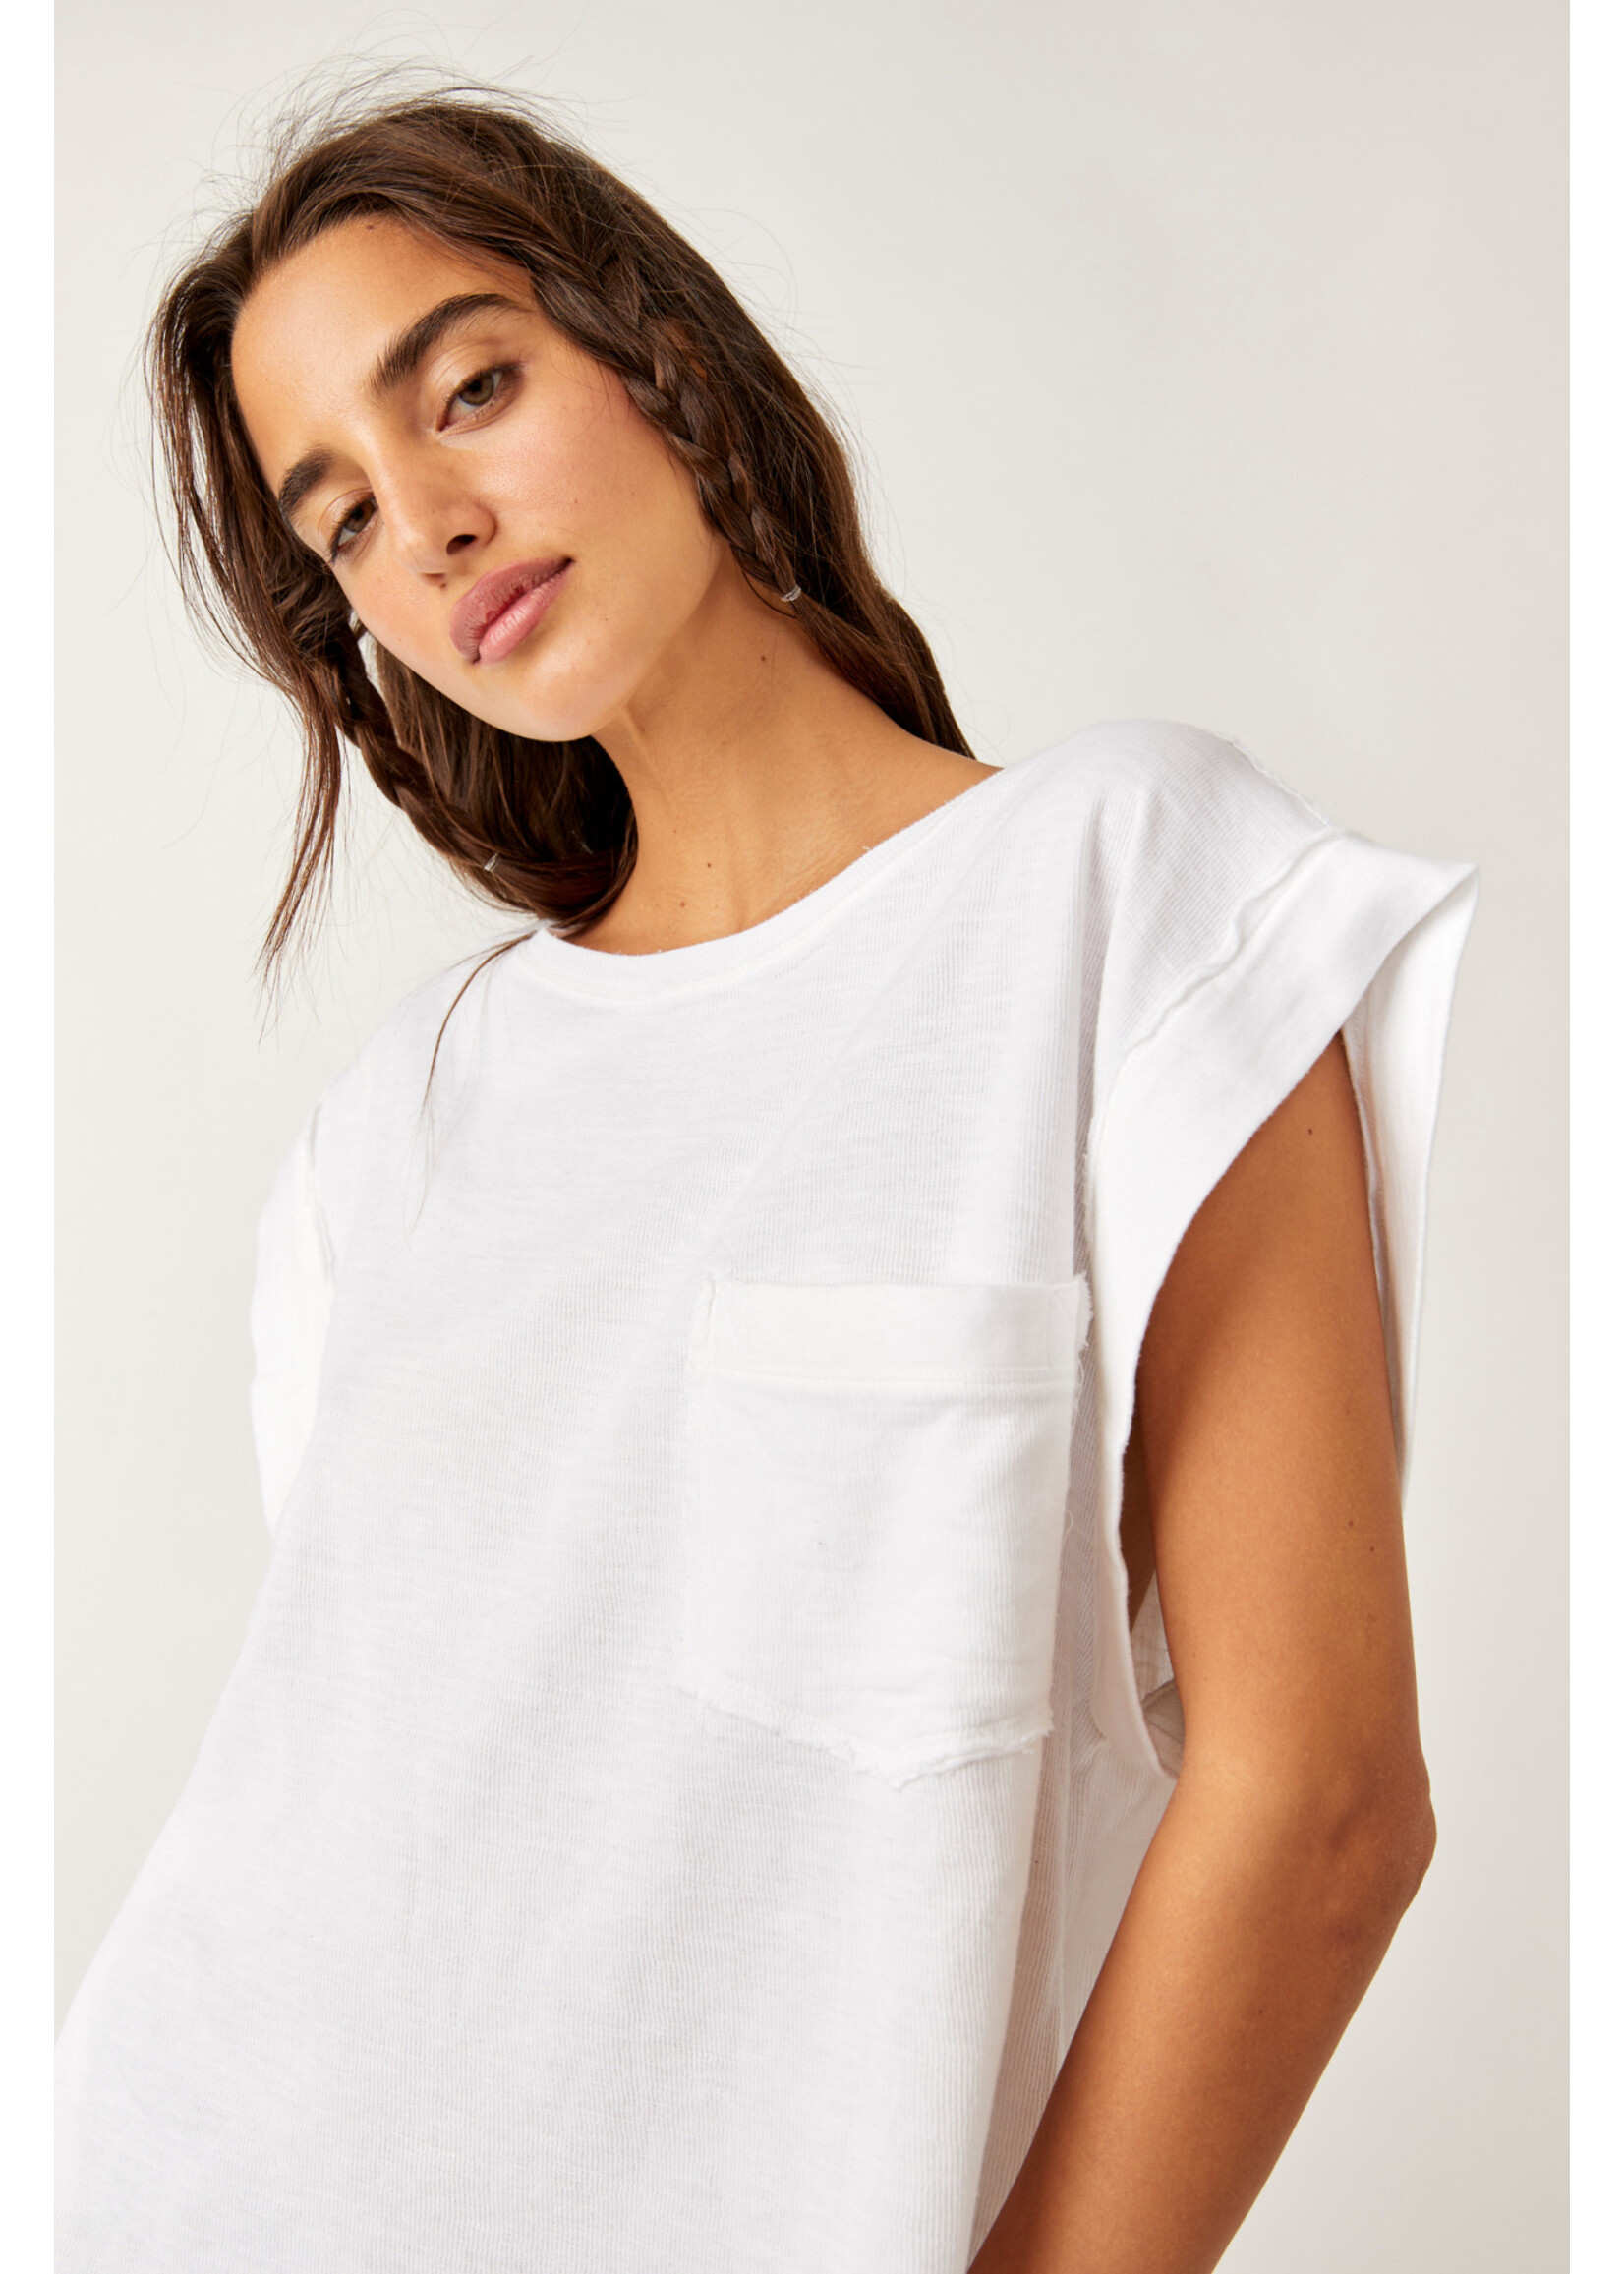 Free People Our Time Tee - Ivory